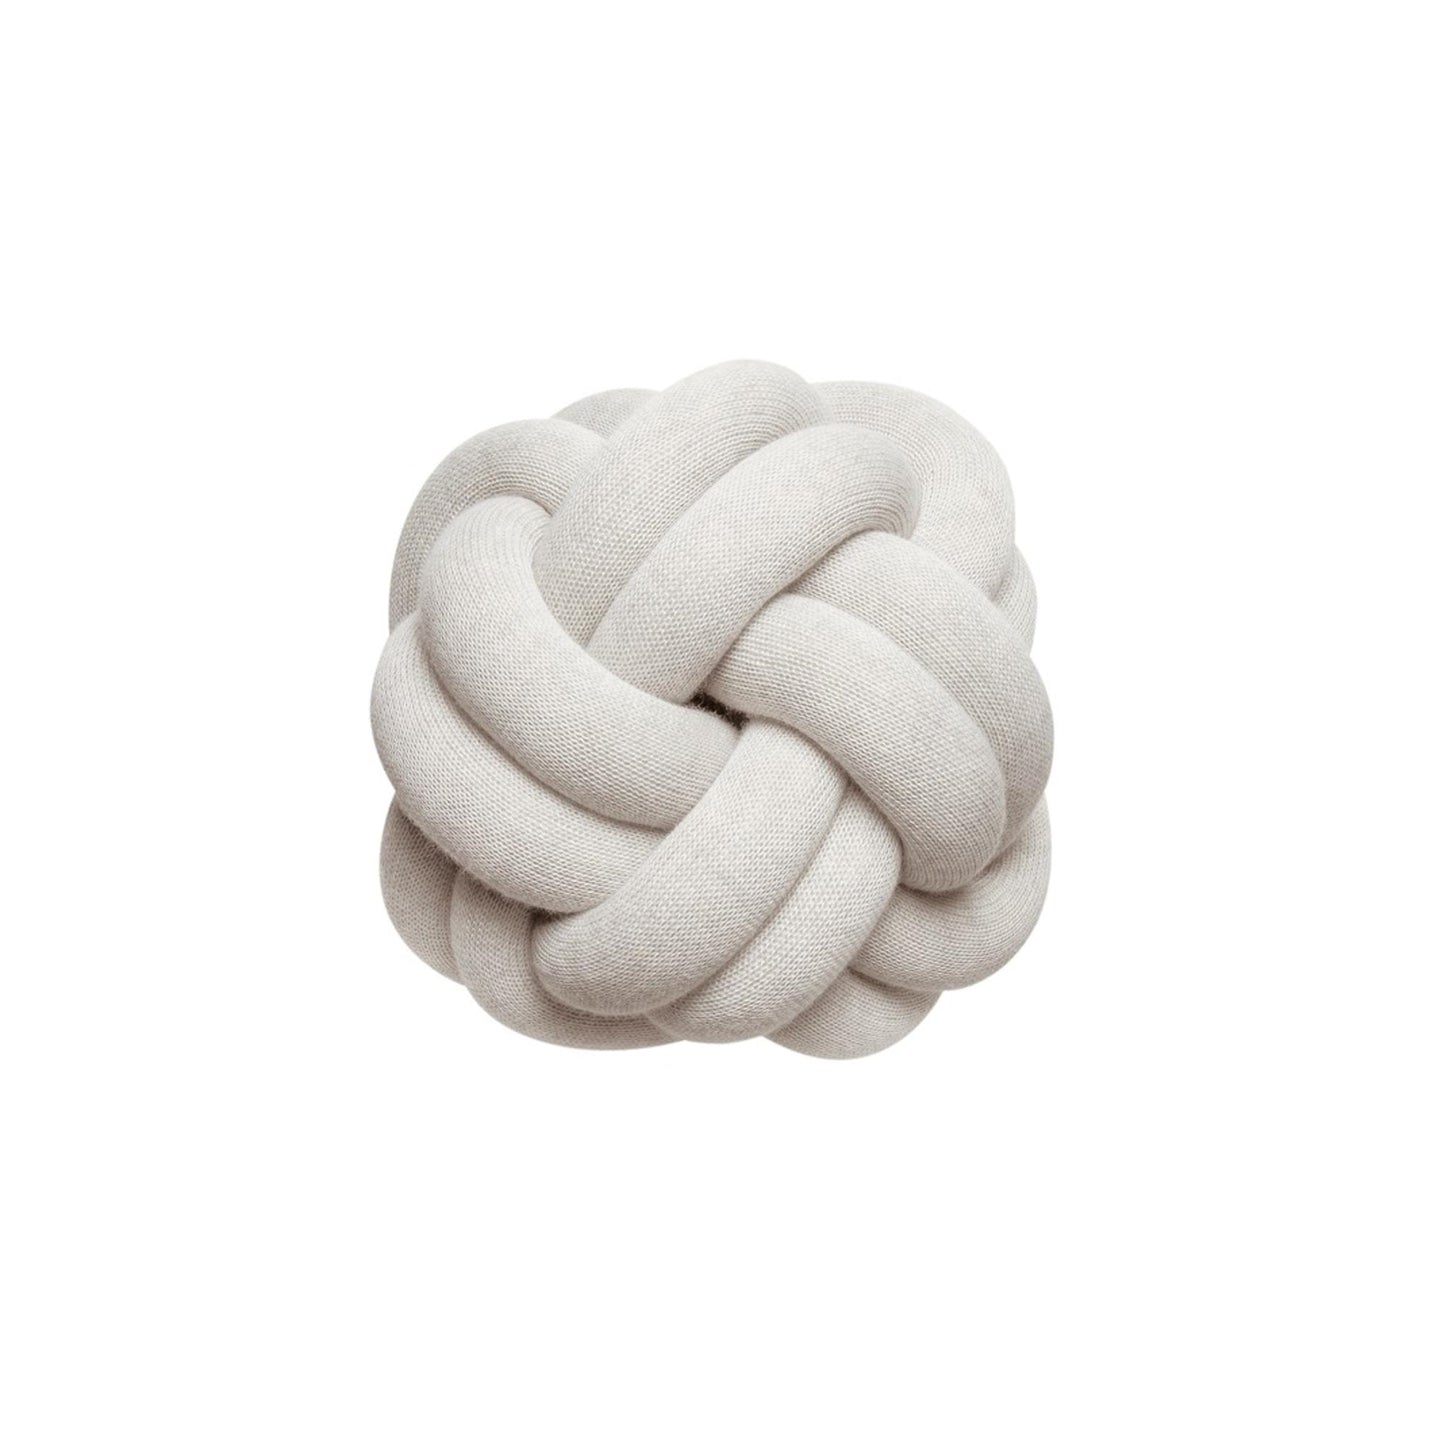 Knot Cushion by Design House Stockholm #Cream